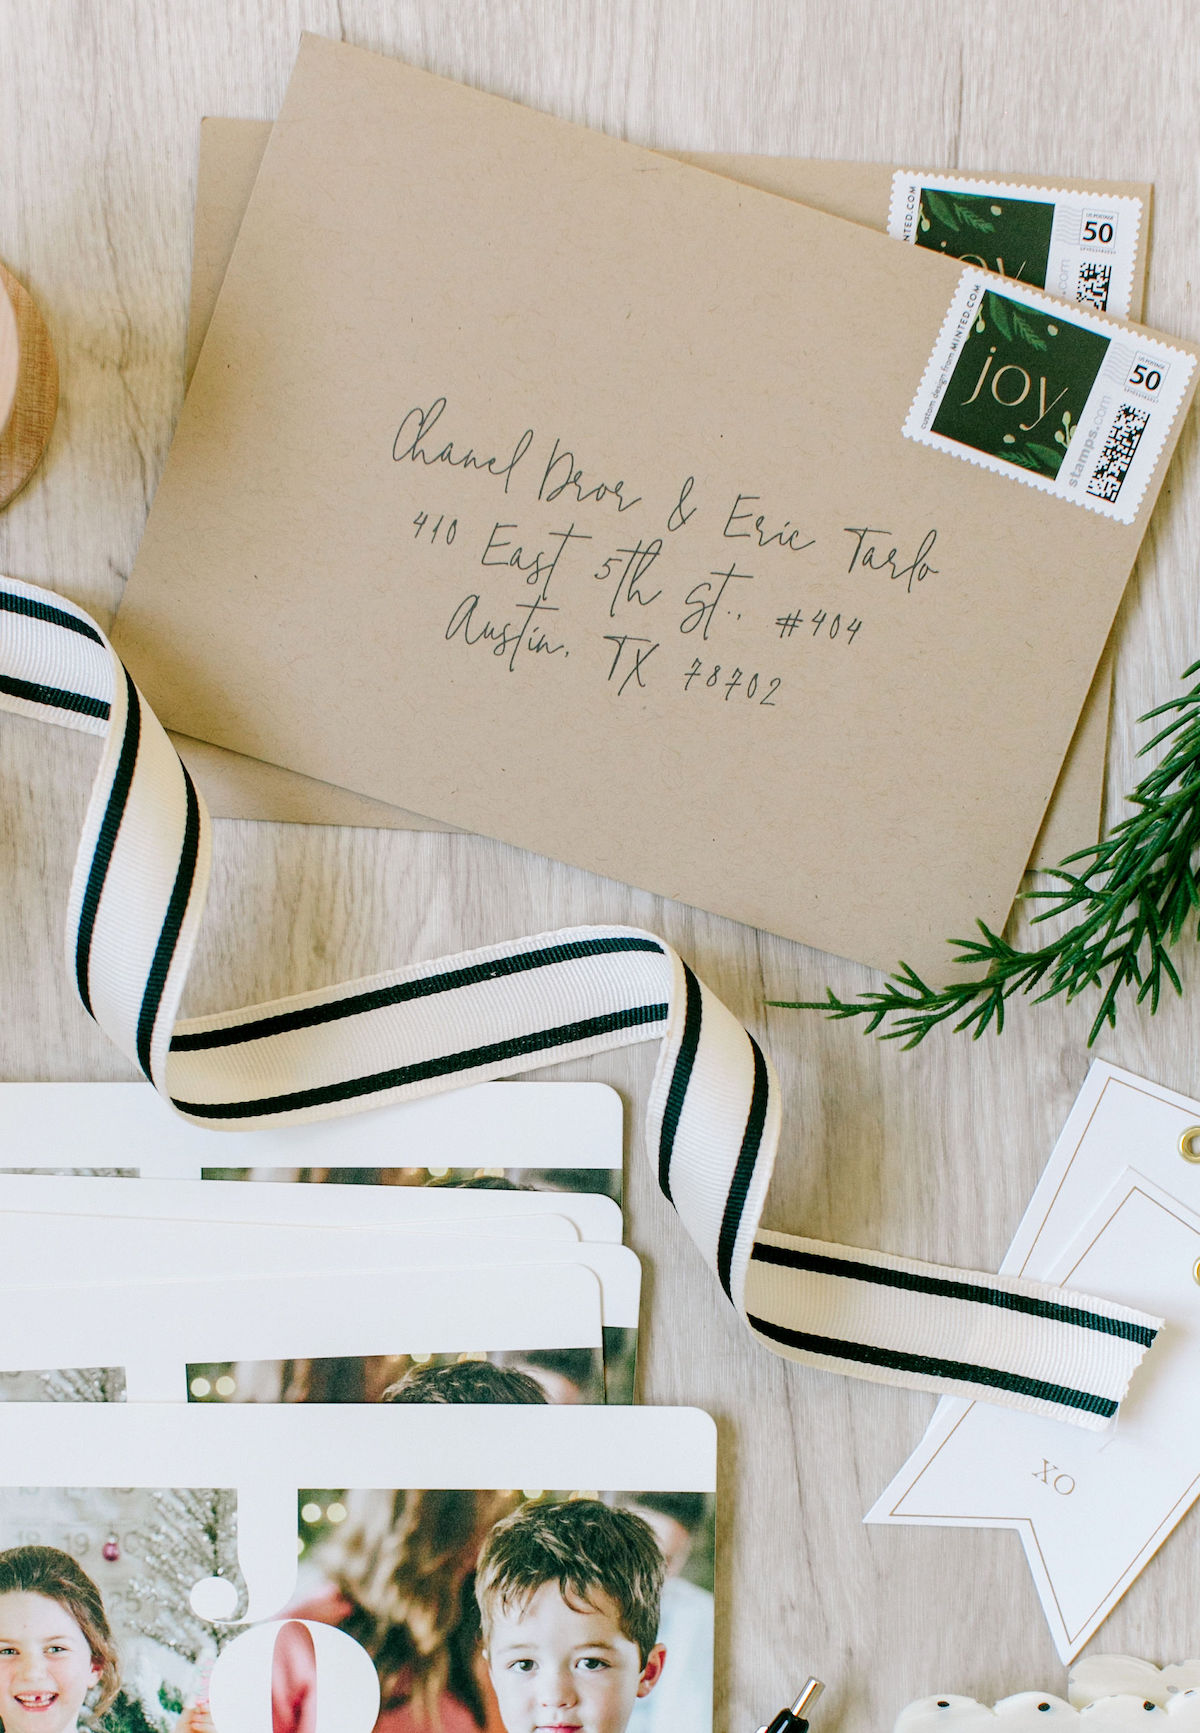 camille styles's holiday cards from minted